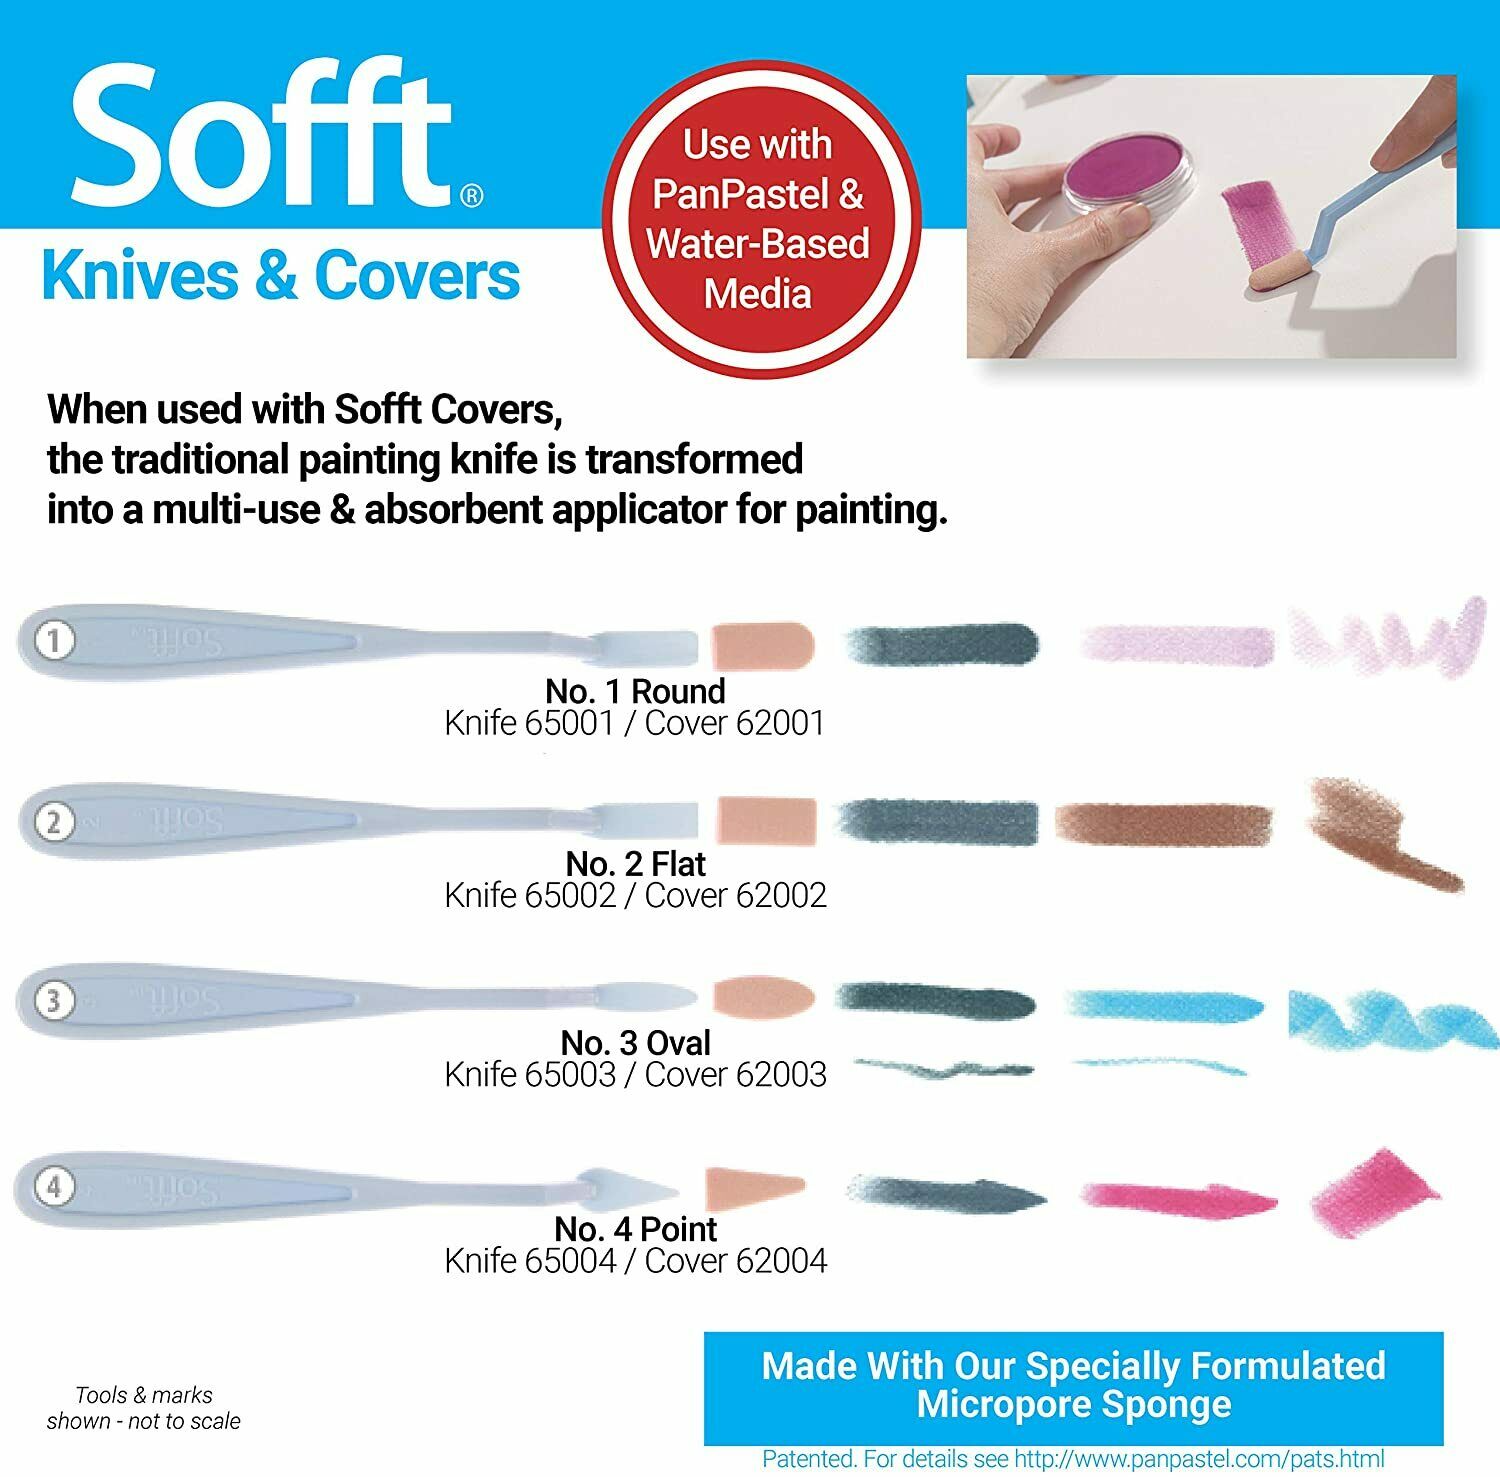 Knives & Covers - Pan Pastel